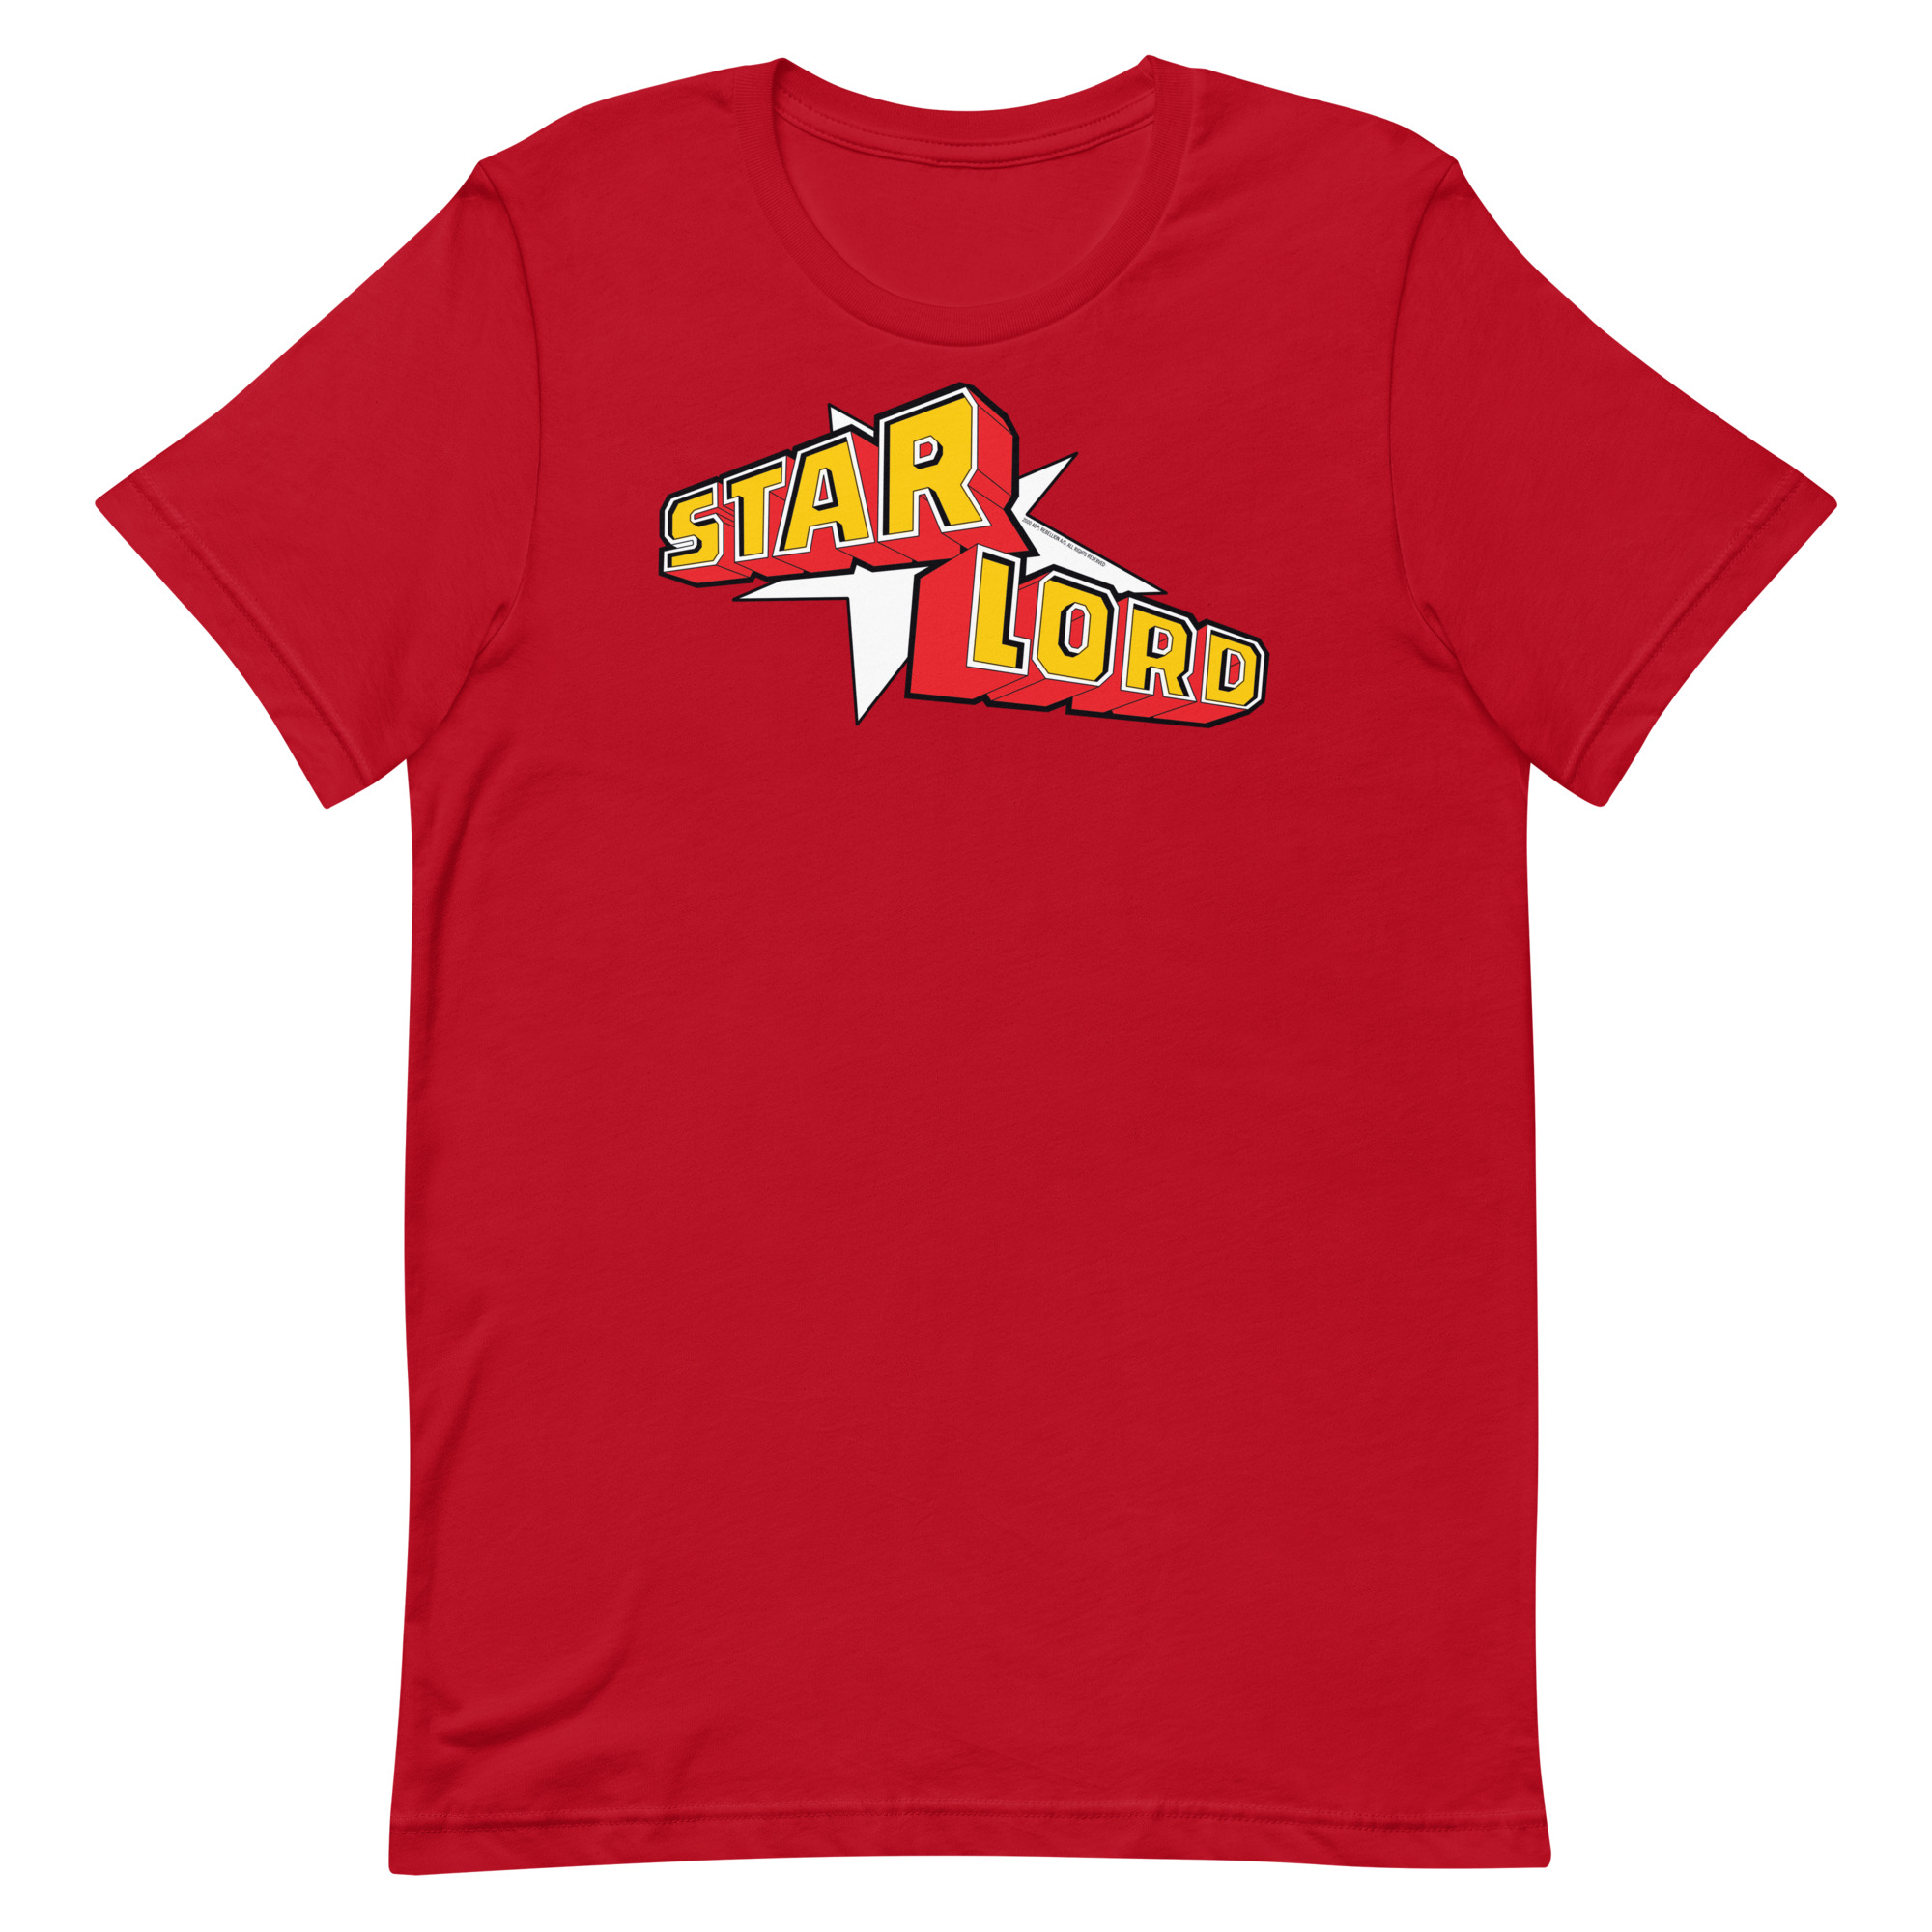 Image of a Red coloured Star Lord t-shirt featuring a large Star Lord logo in the middle